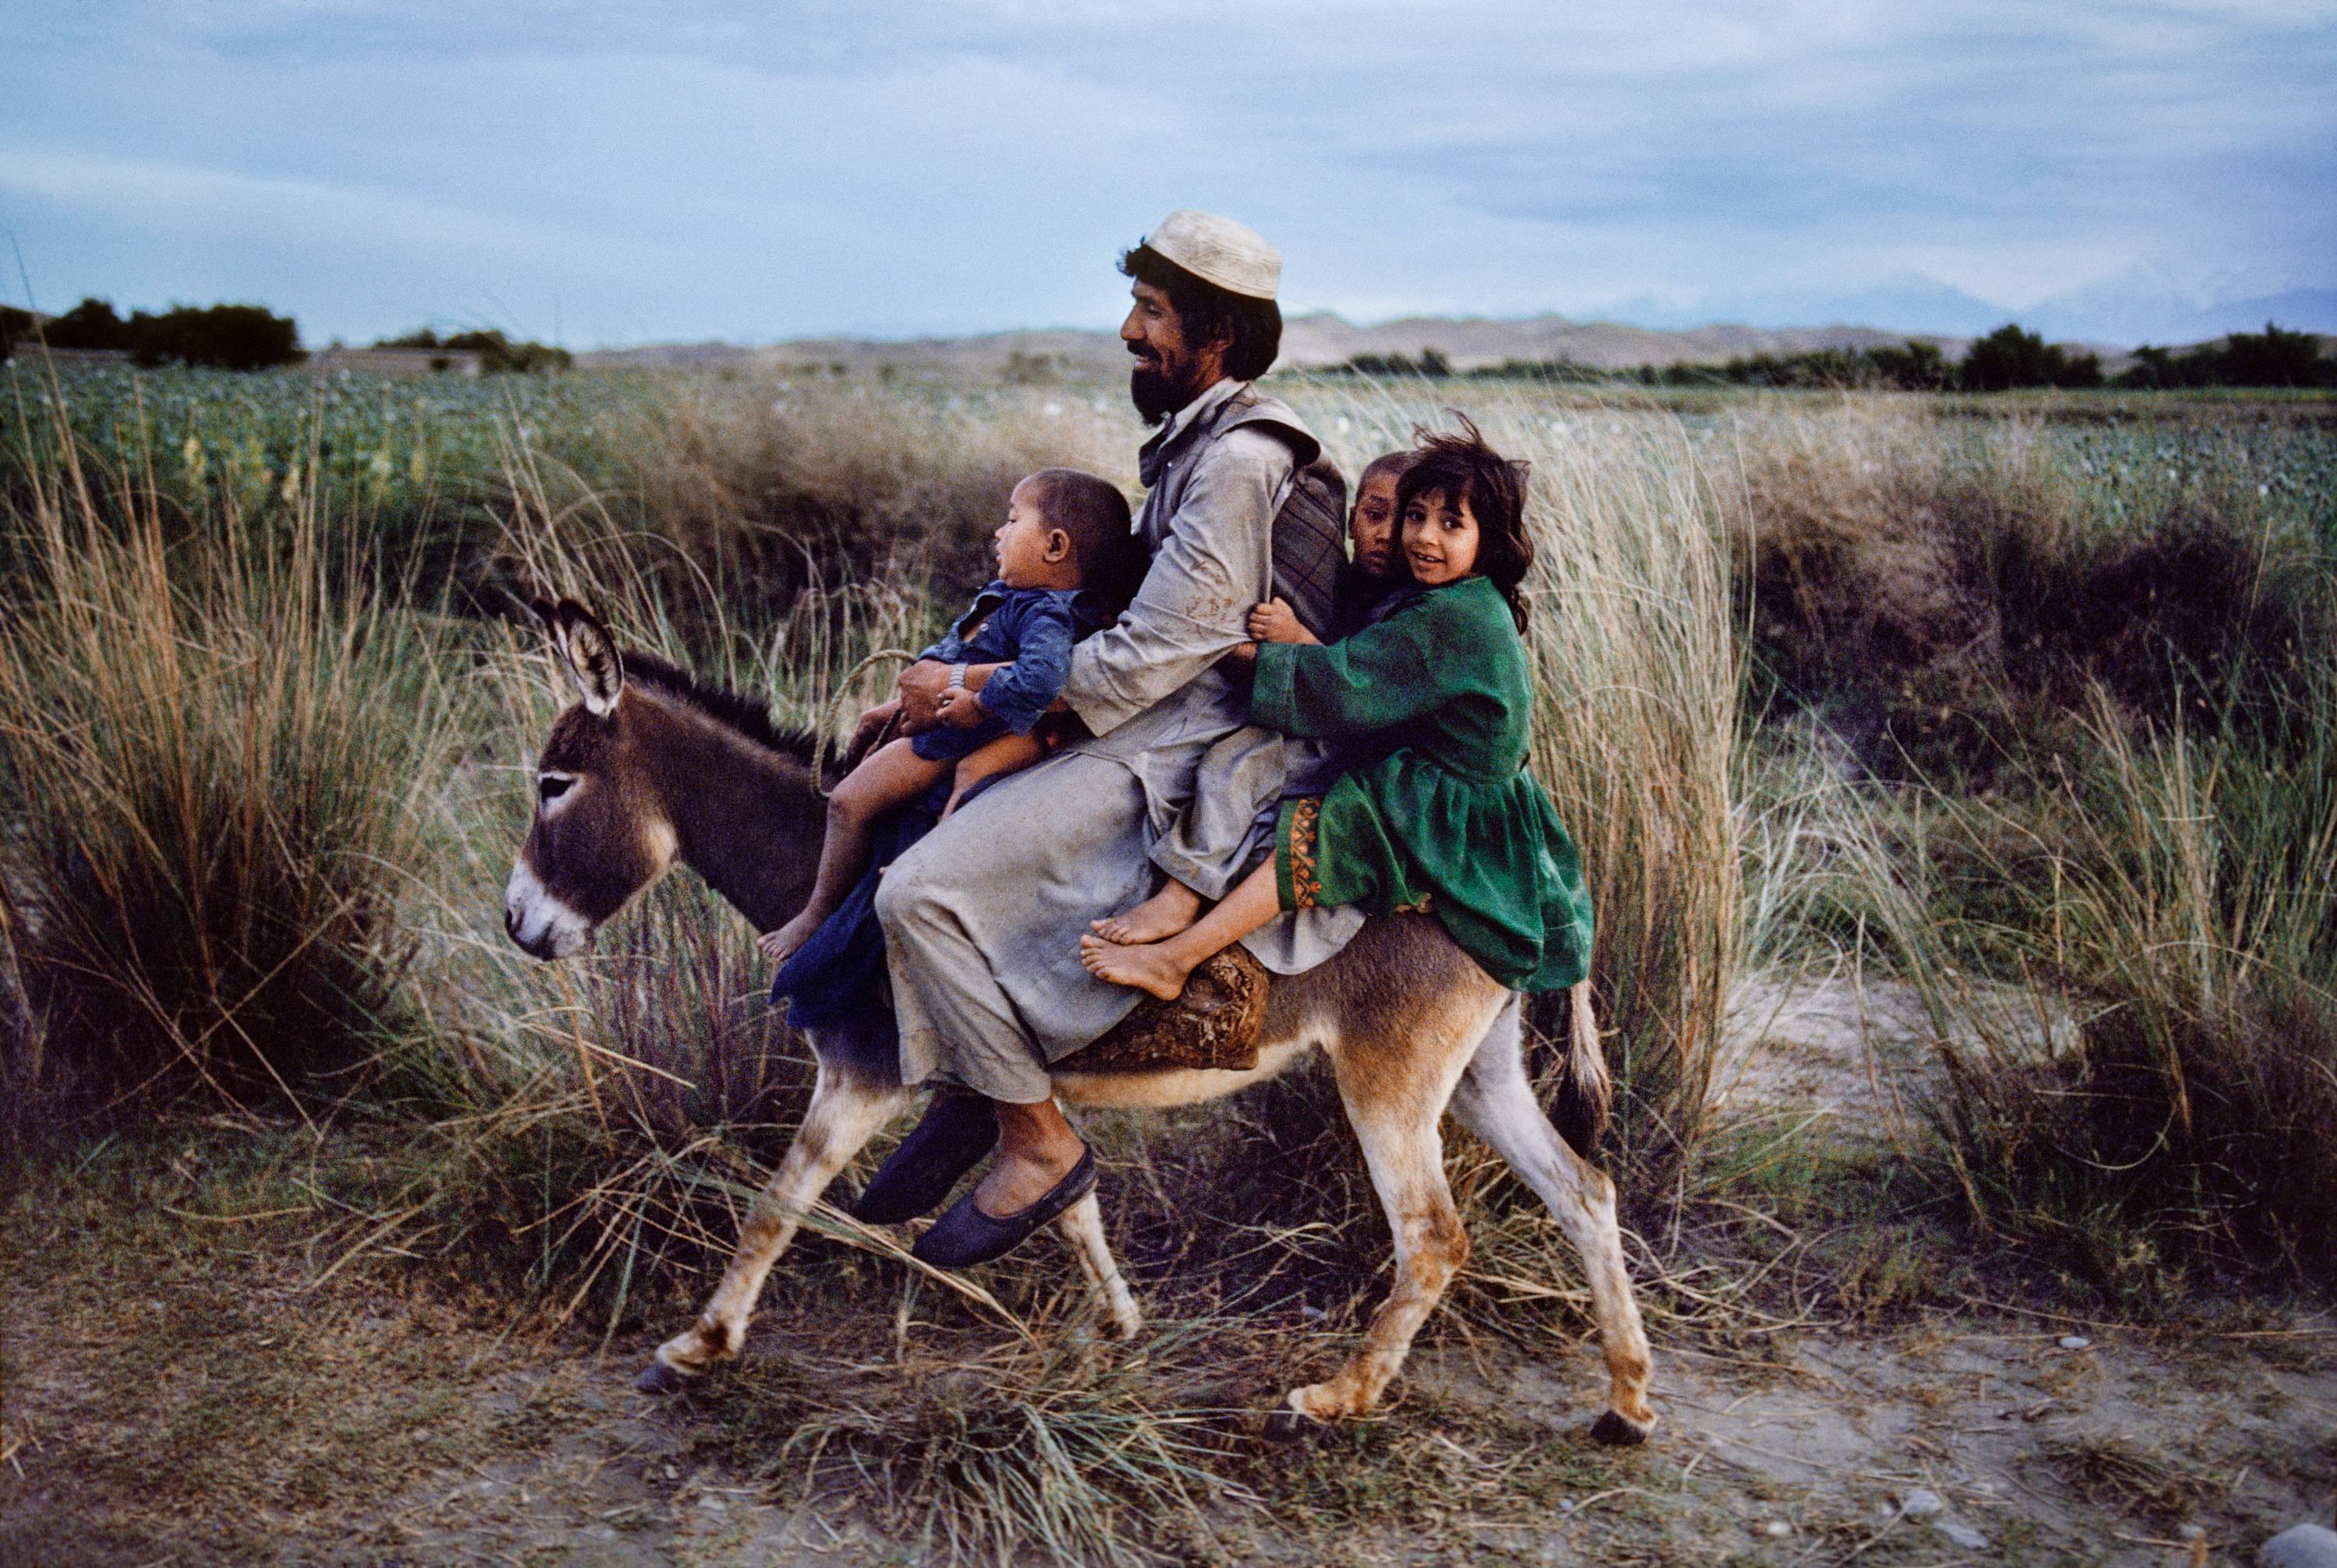 Family Rides Donkey, Afghanistan, 2003 - Steve McCurry (Colour Photography)
Signed and numbered on photographer's edition label on reverse 
Digital c-type print
20 x 24 inches 
Edition of 30  

Also available in two larger sizes, please contact the